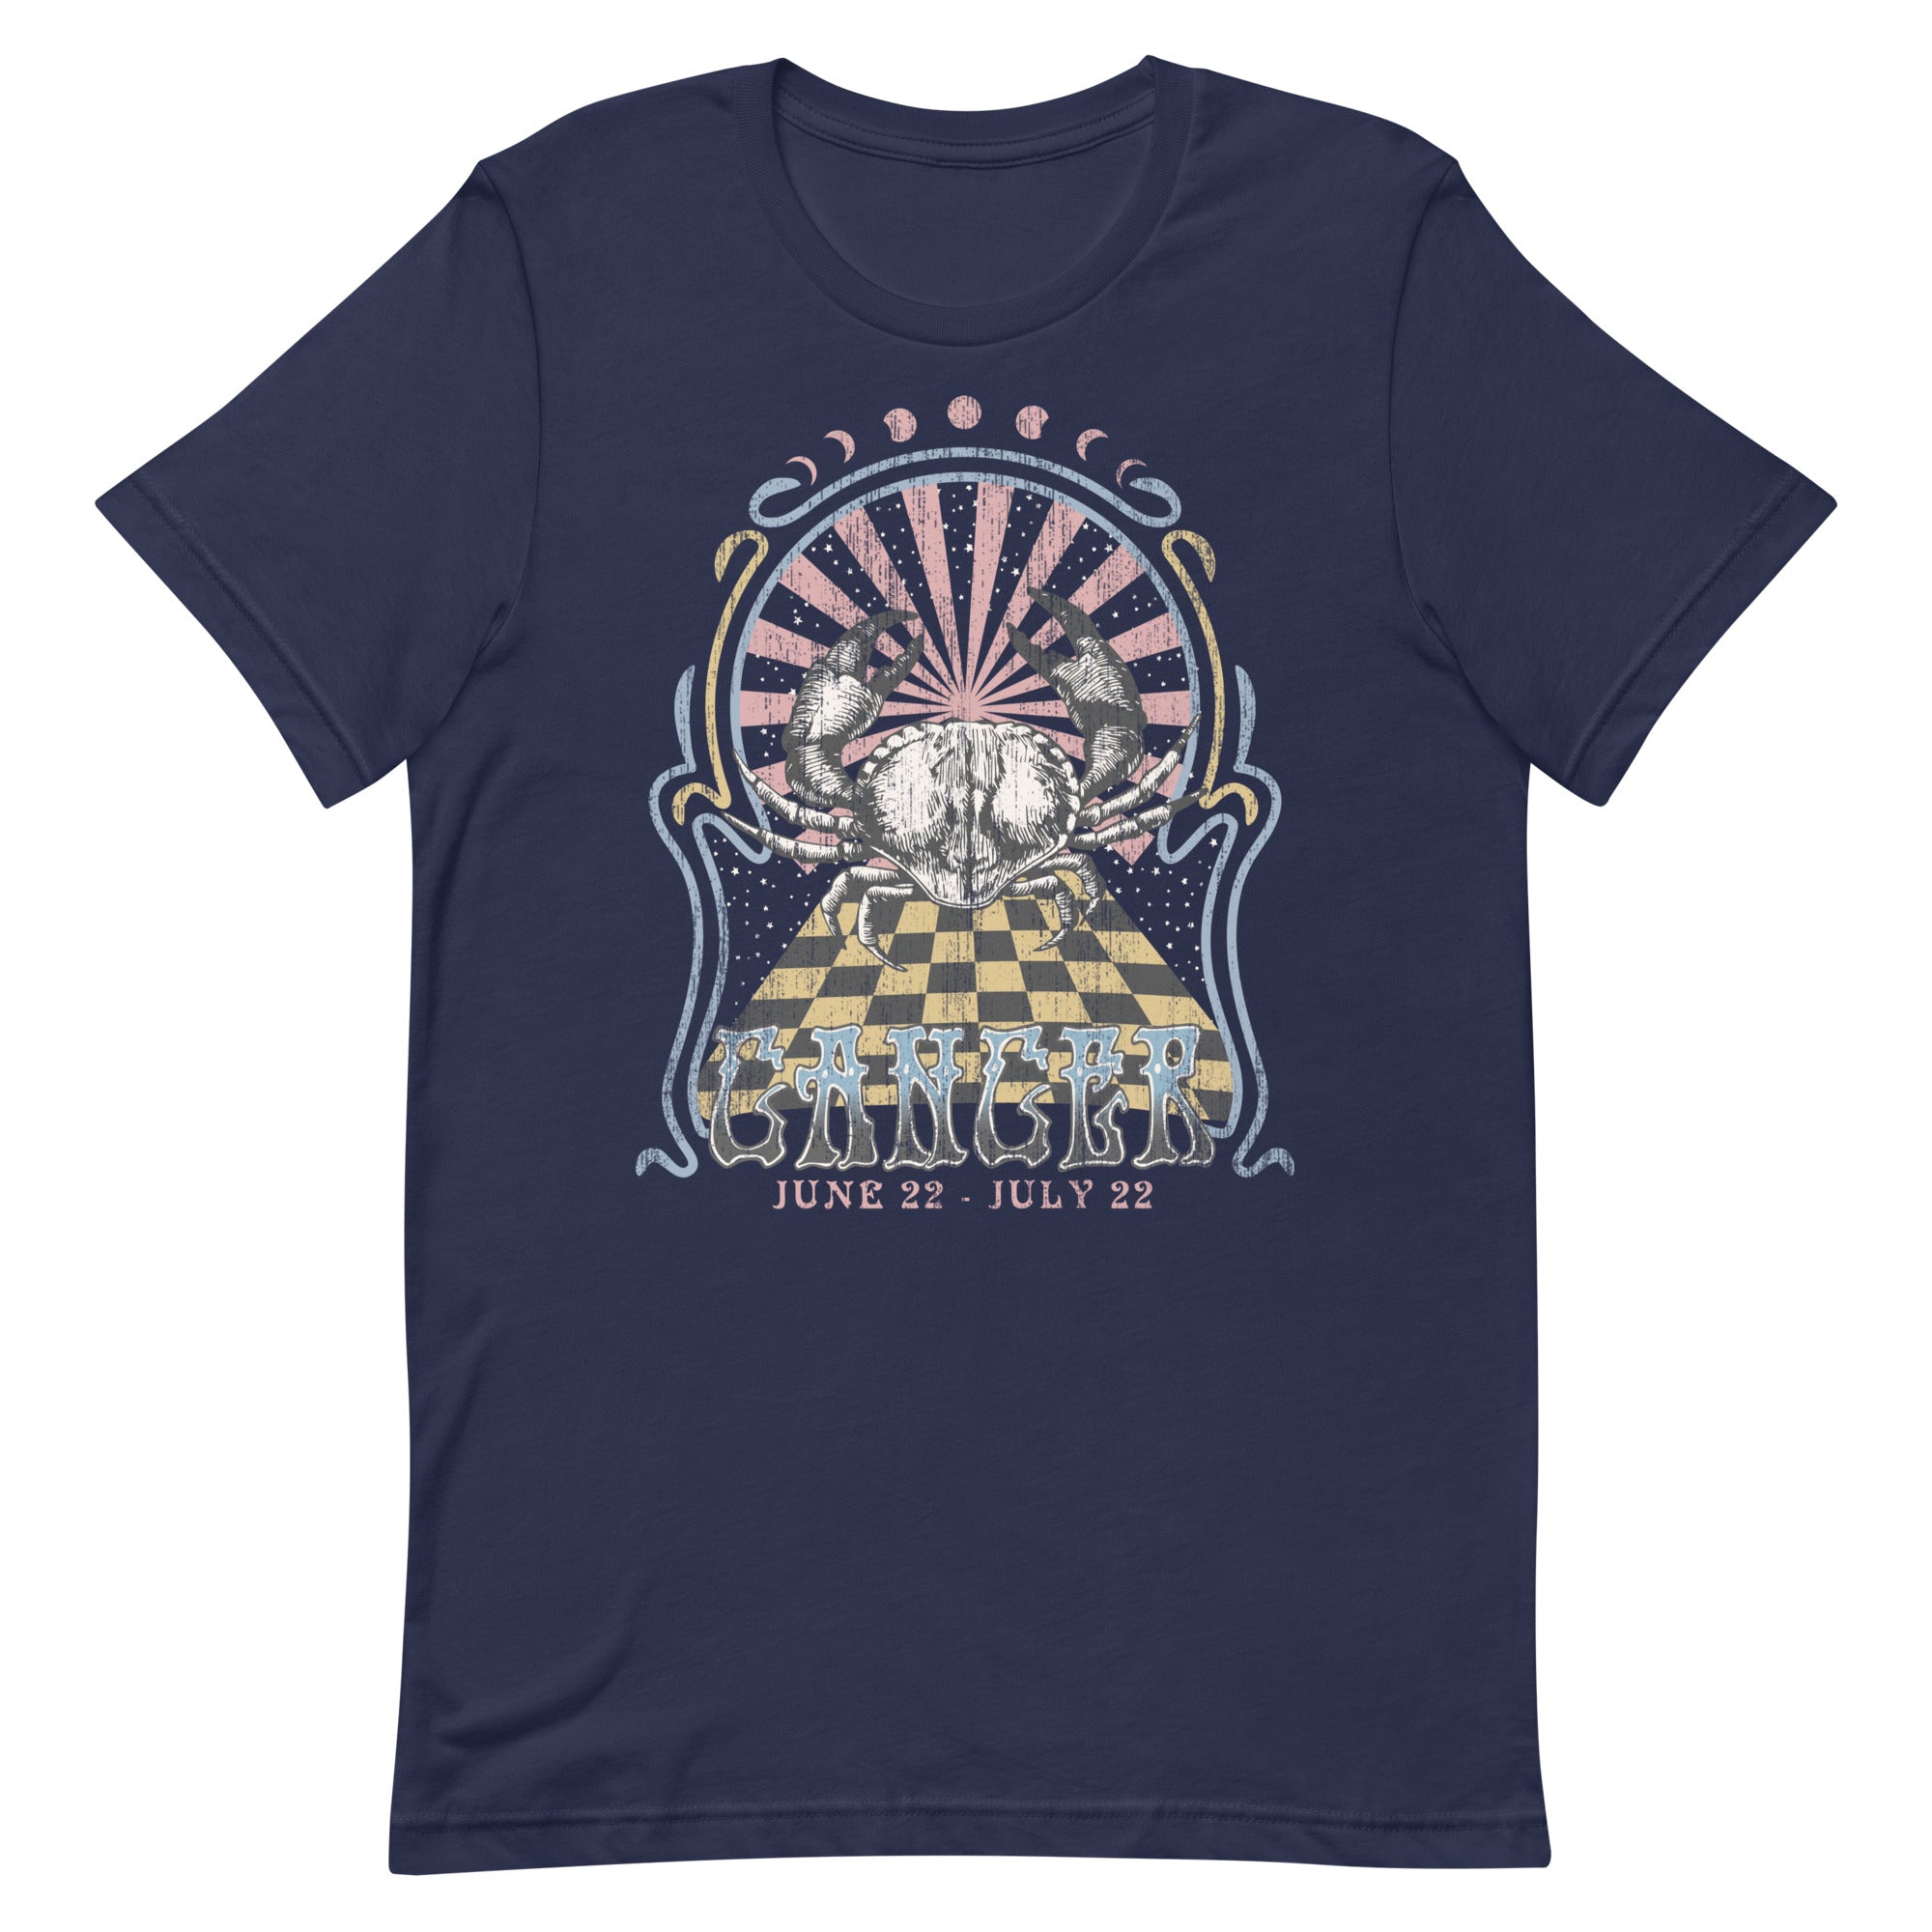 Cancer Band T-Shirt Inspired Graphic Tee